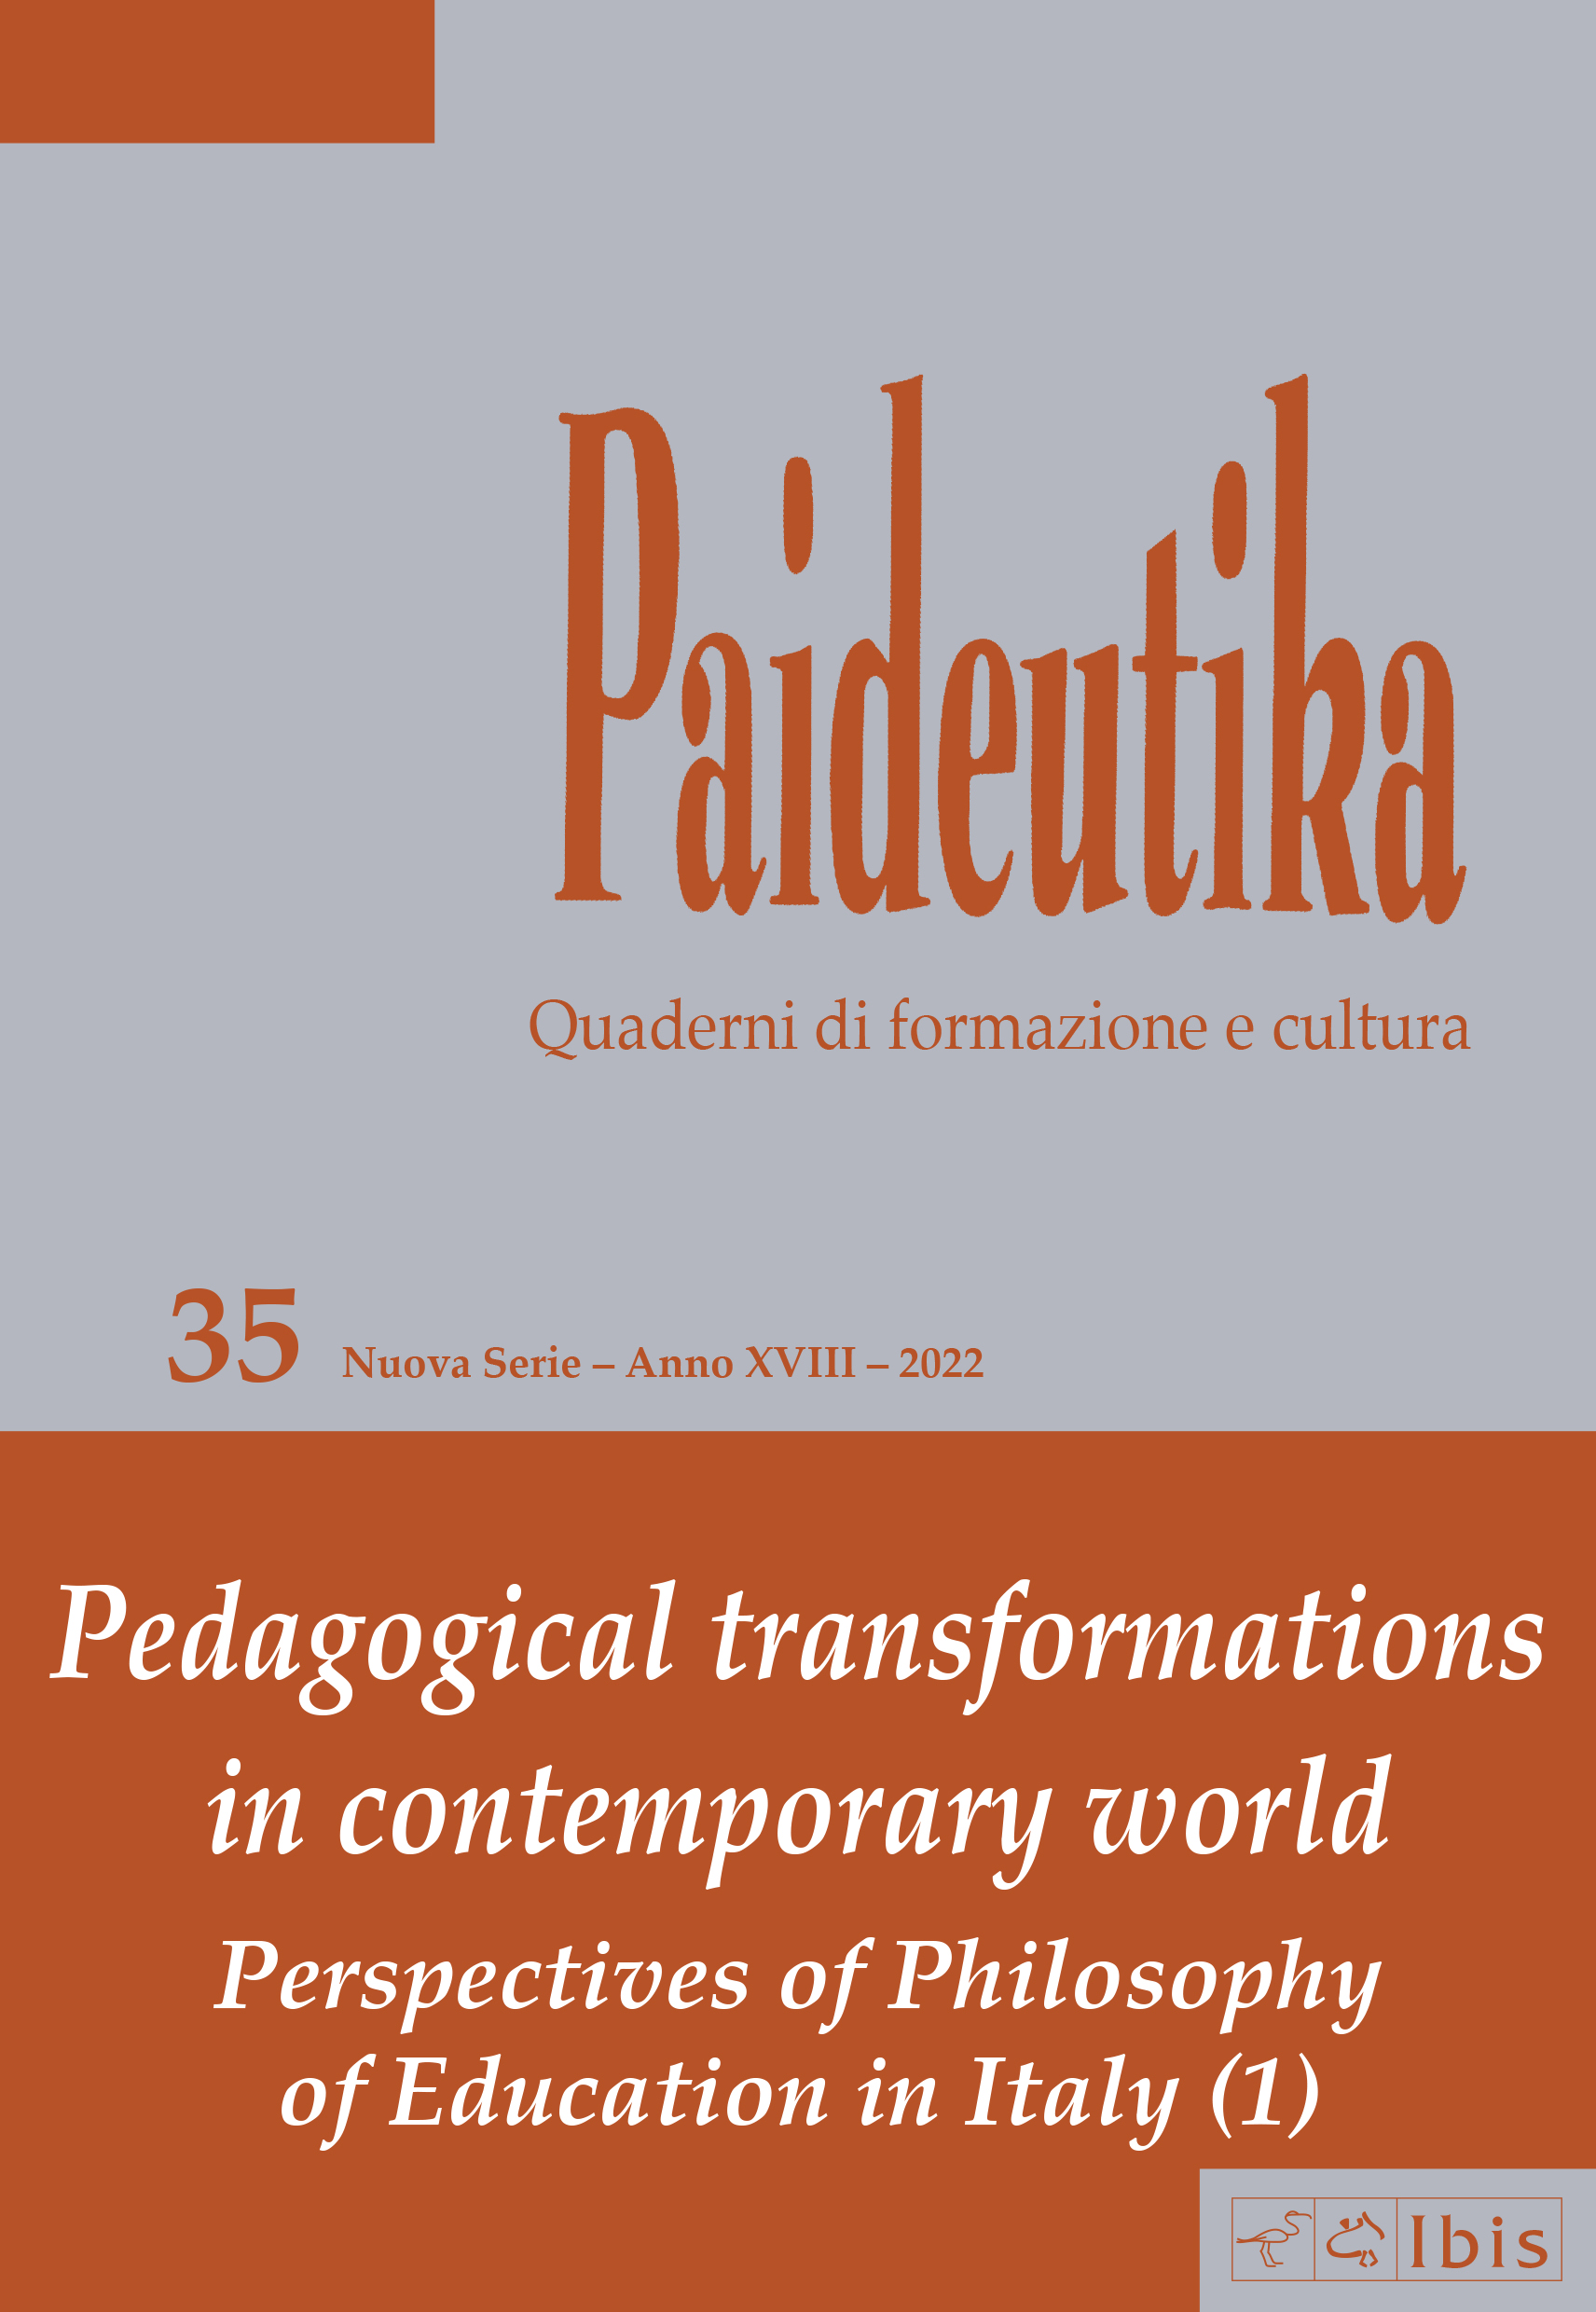 					Visualizza N. 35 (2022): Pedagogical transformations in contemporary world. Perspectives of Philosophy of Education in Italy
				